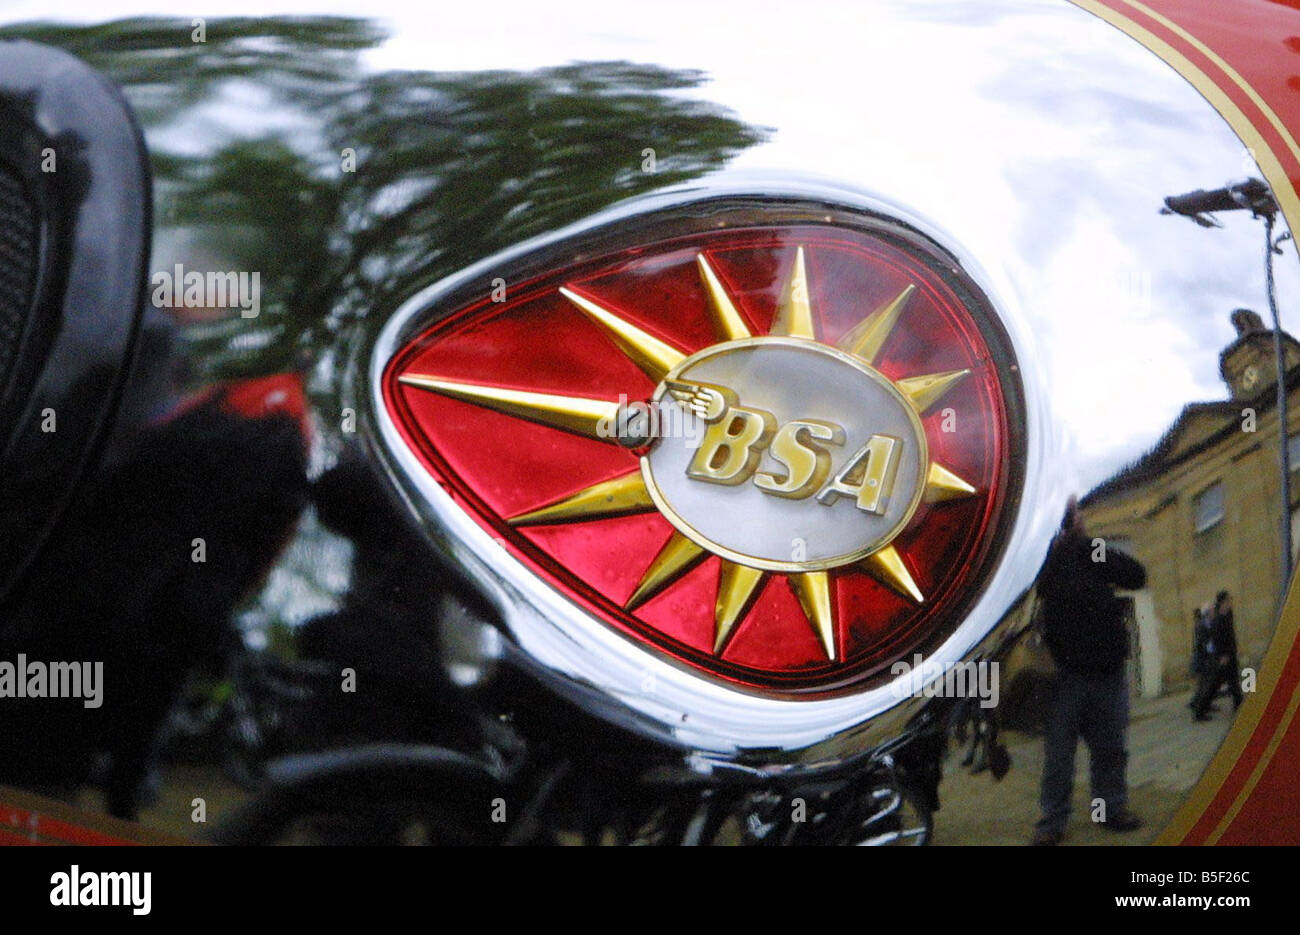 Belsay Vintage Motorcycle Show Names that have long since left the list of British motorbike manufacturers were present at the Belsay vintage bike show BSA 26 05 03 Stock Photo